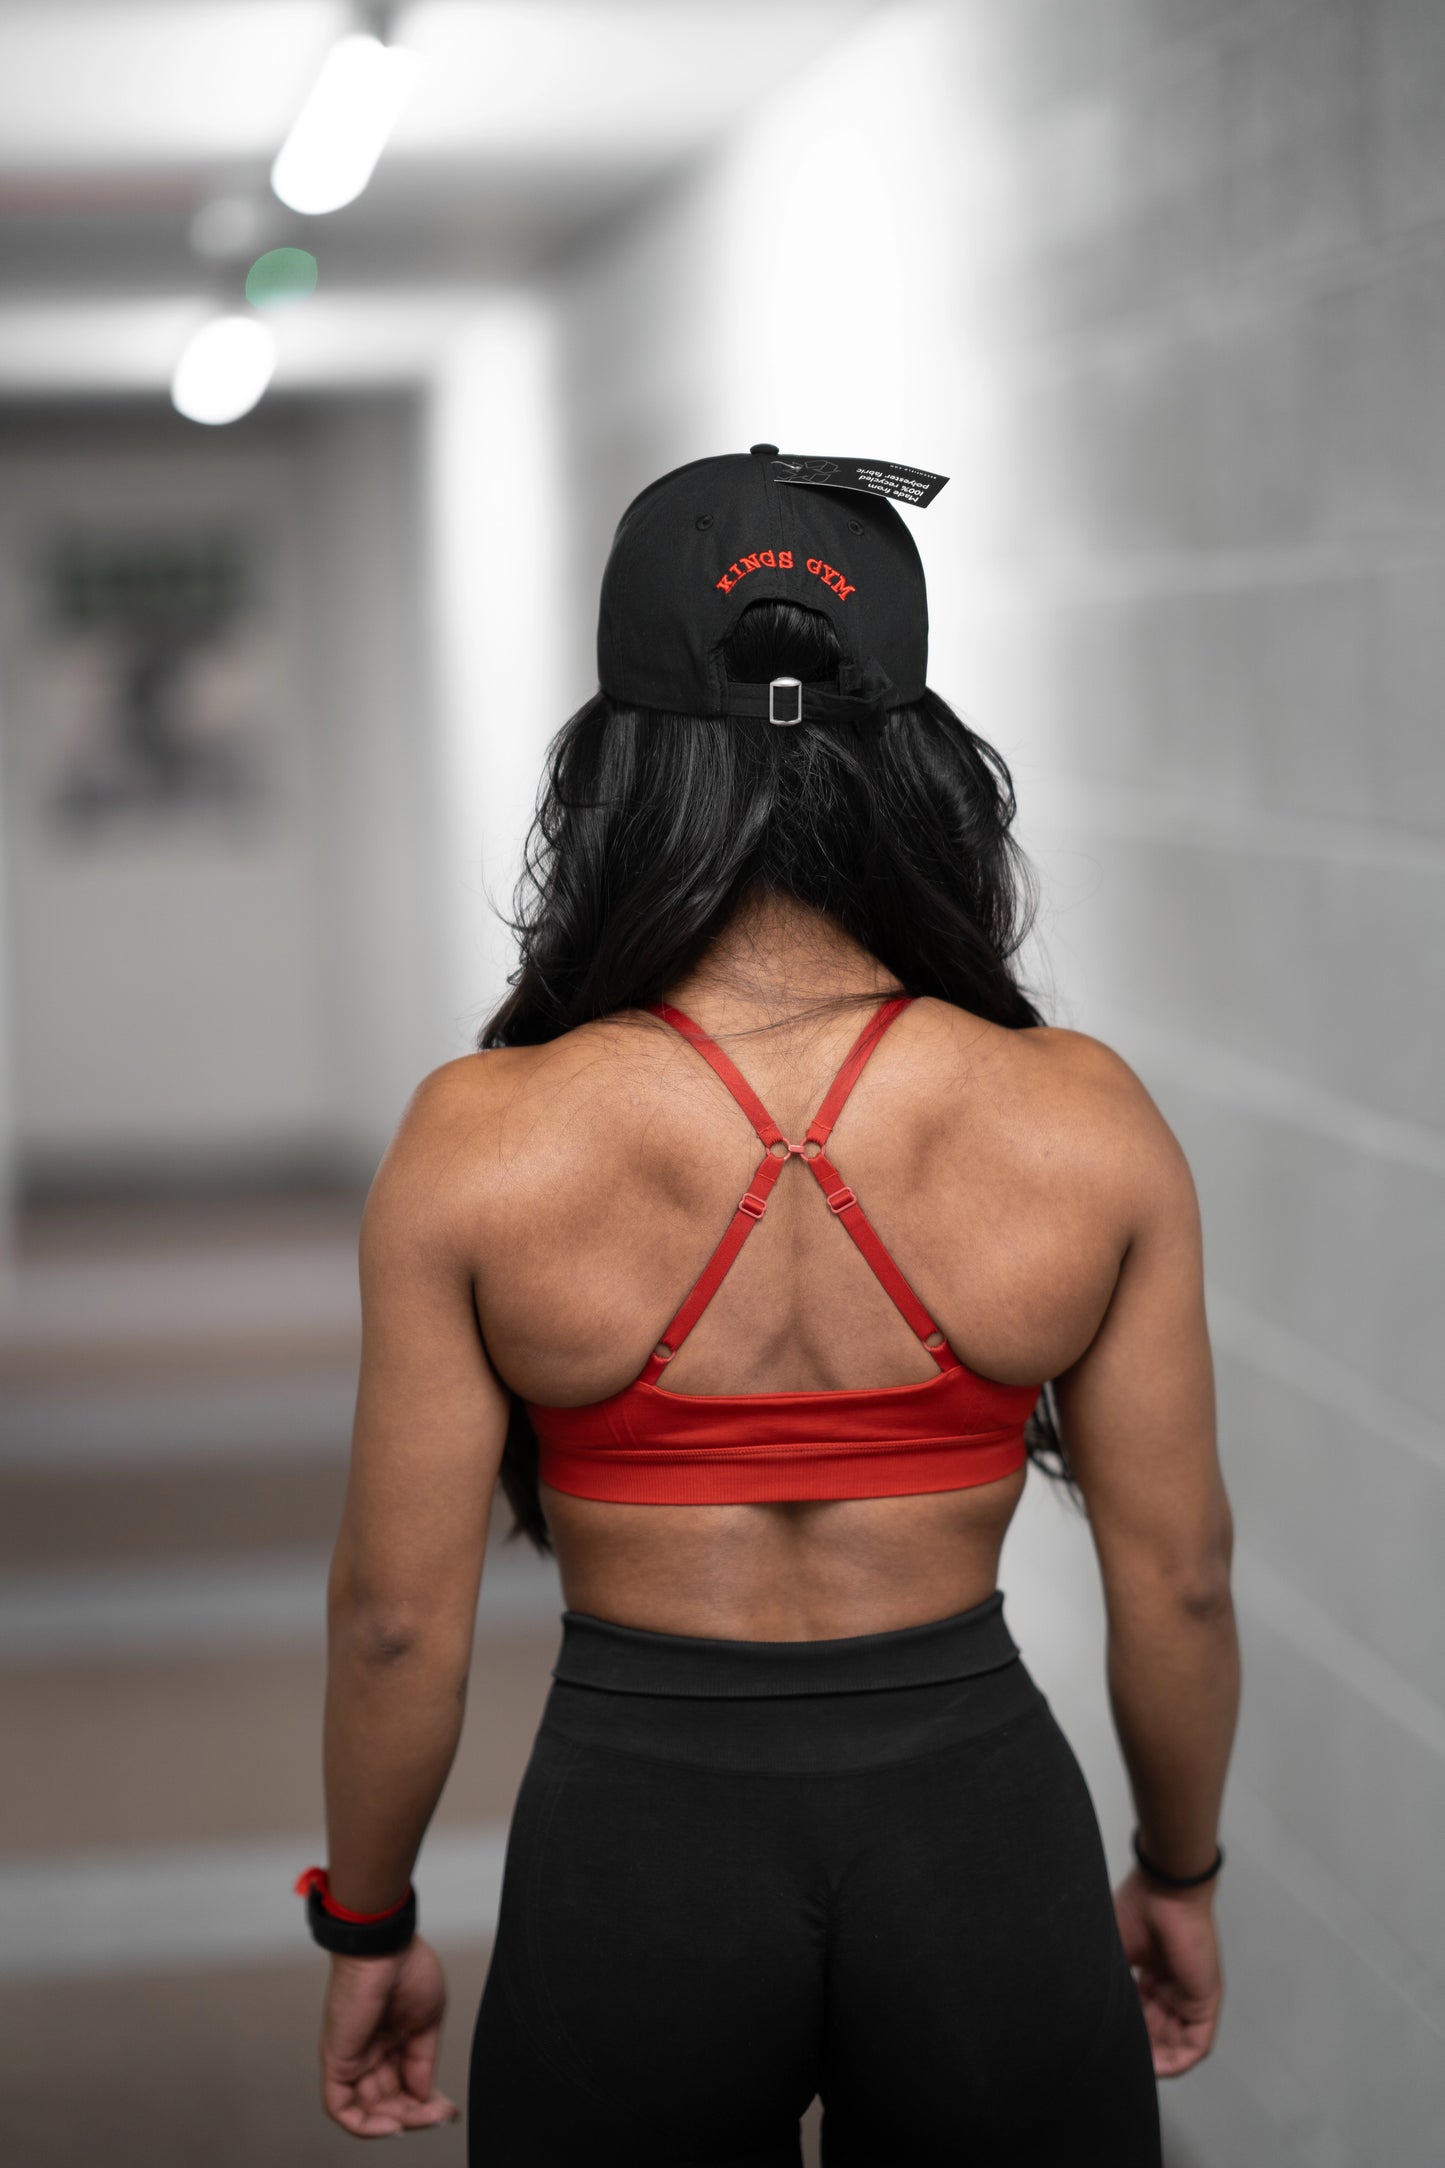 KingsGym Cool Red Cap from behind On Lady